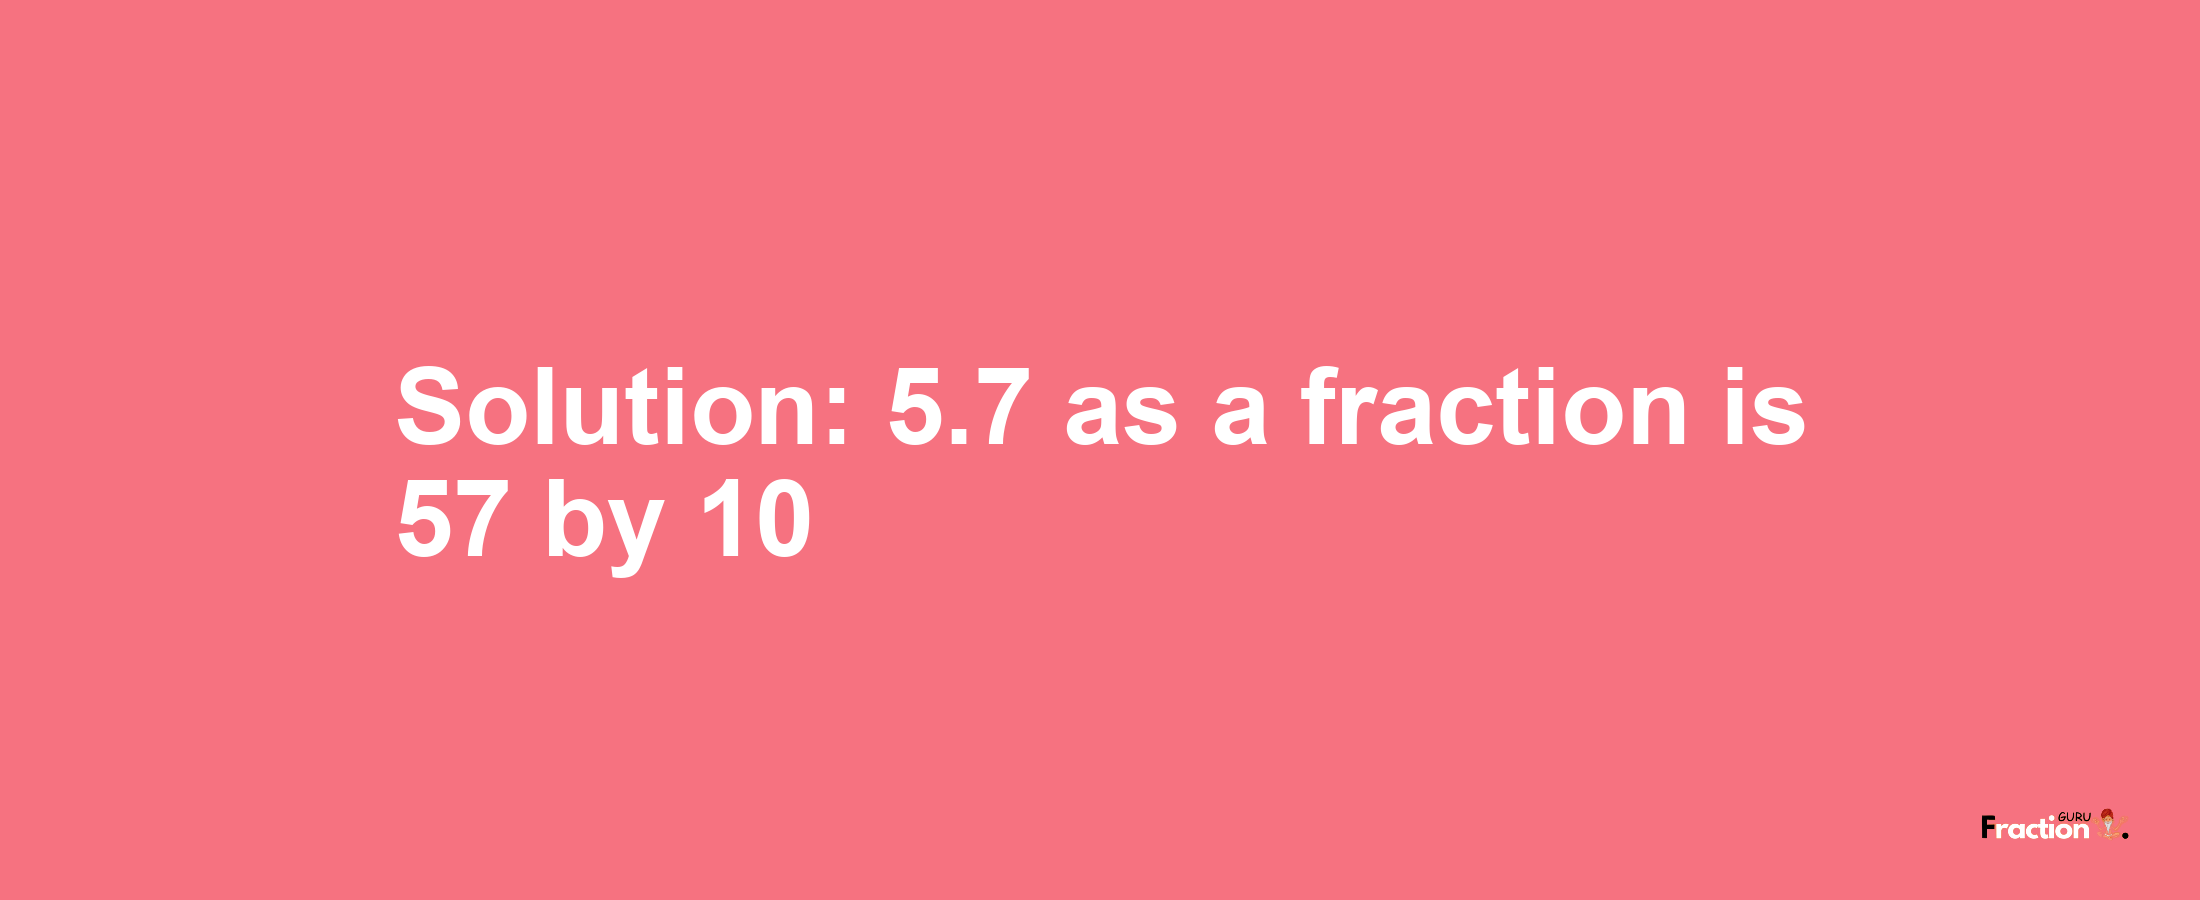 Solution:5.7 as a fraction is 57/10